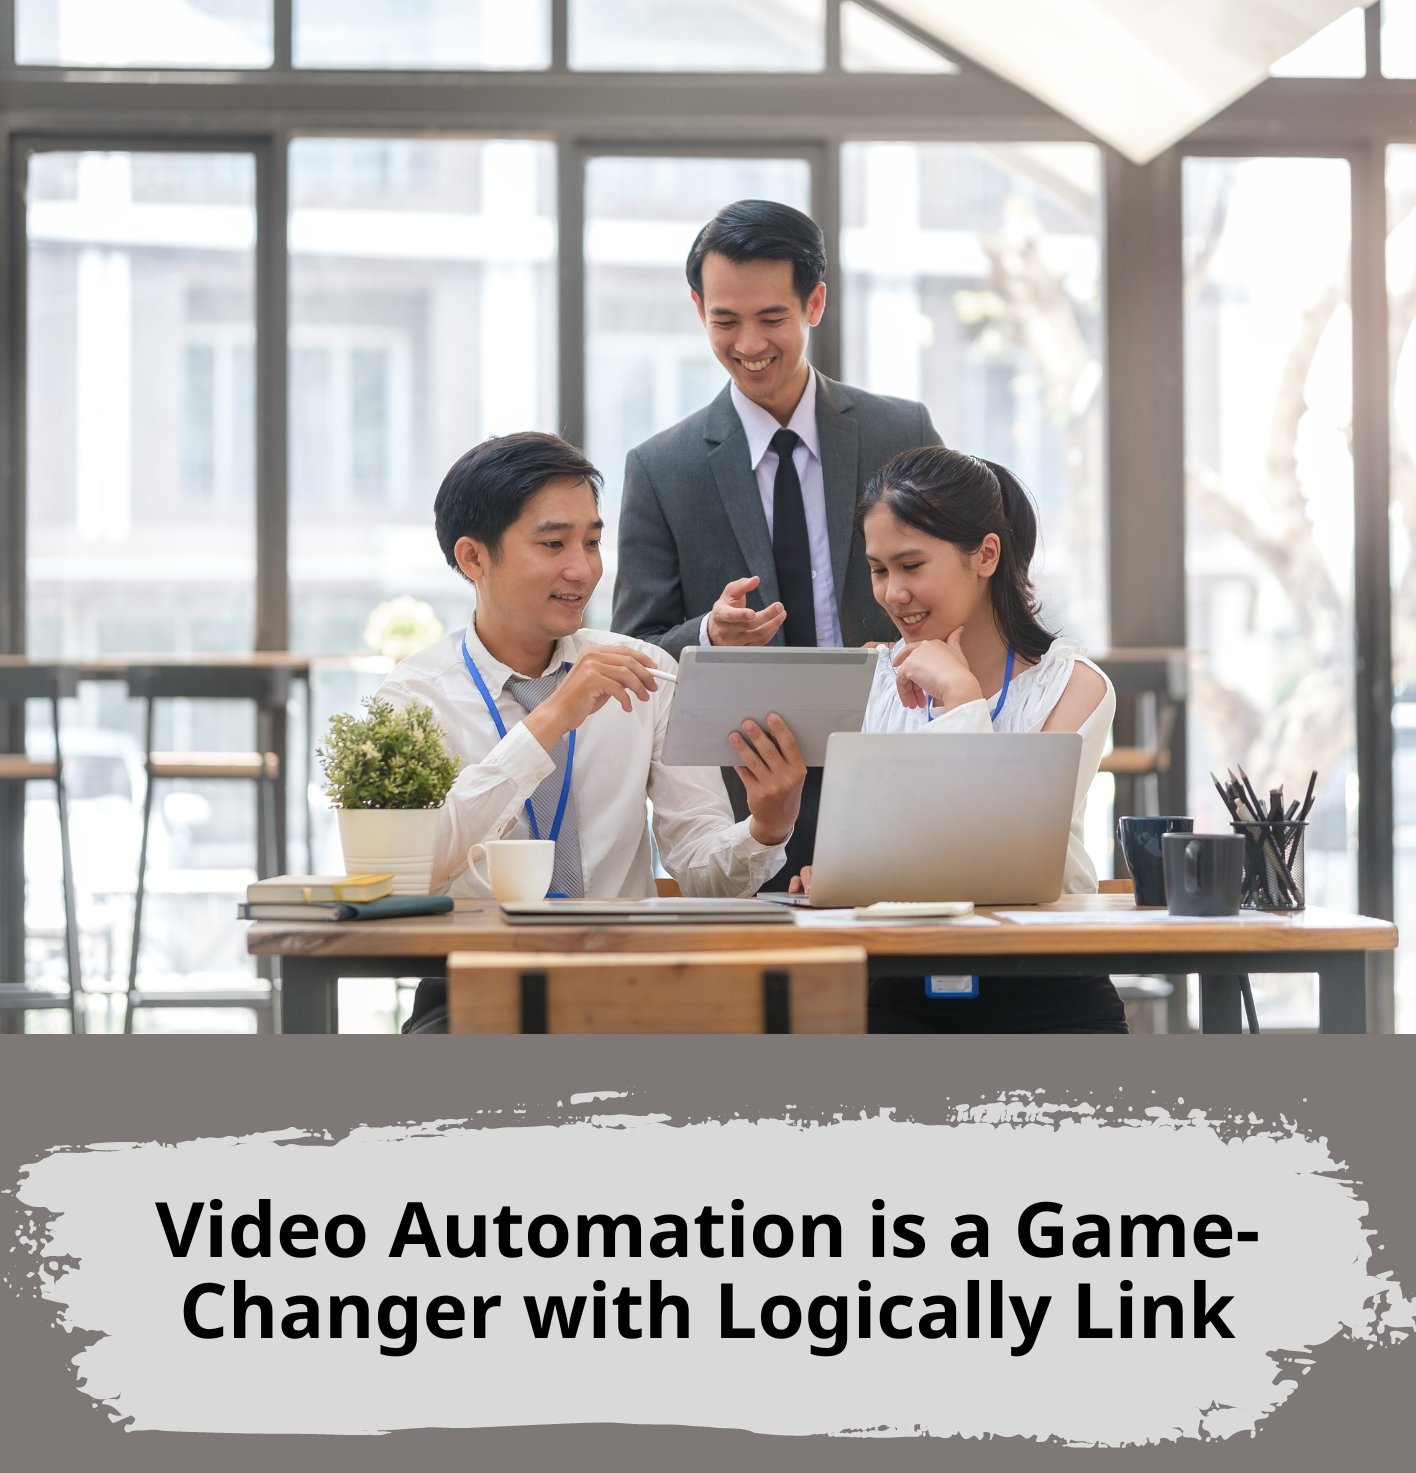 Video Automation is a Game-Changer with Logically Link